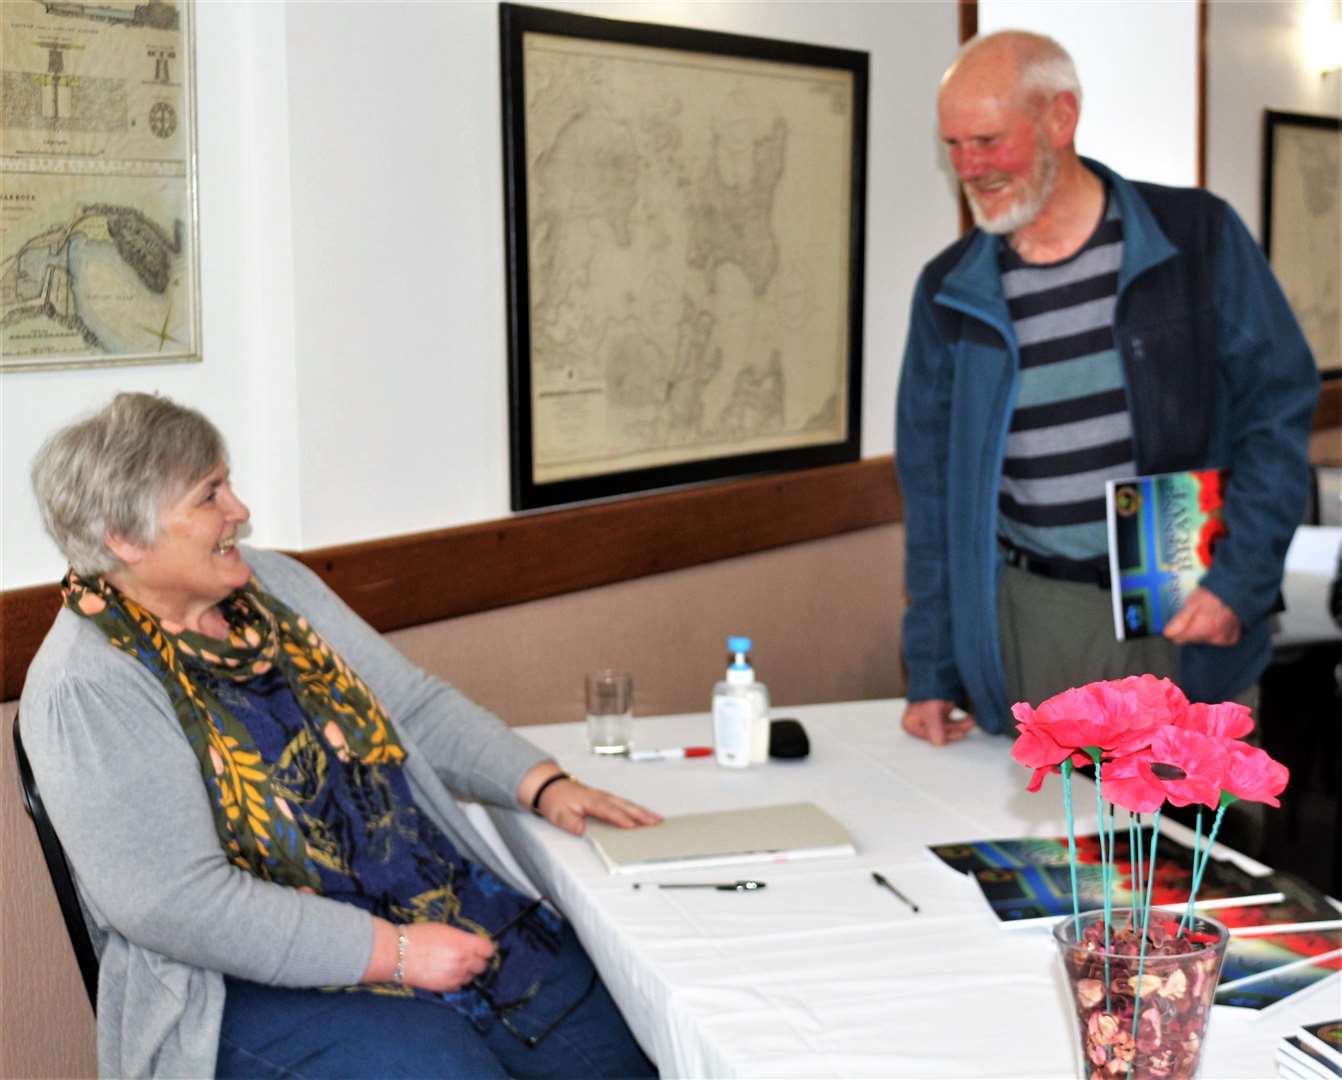 Kathy enjoyed having a natter with visitors to the event who purchased her book. Picture: Eswyl Fell